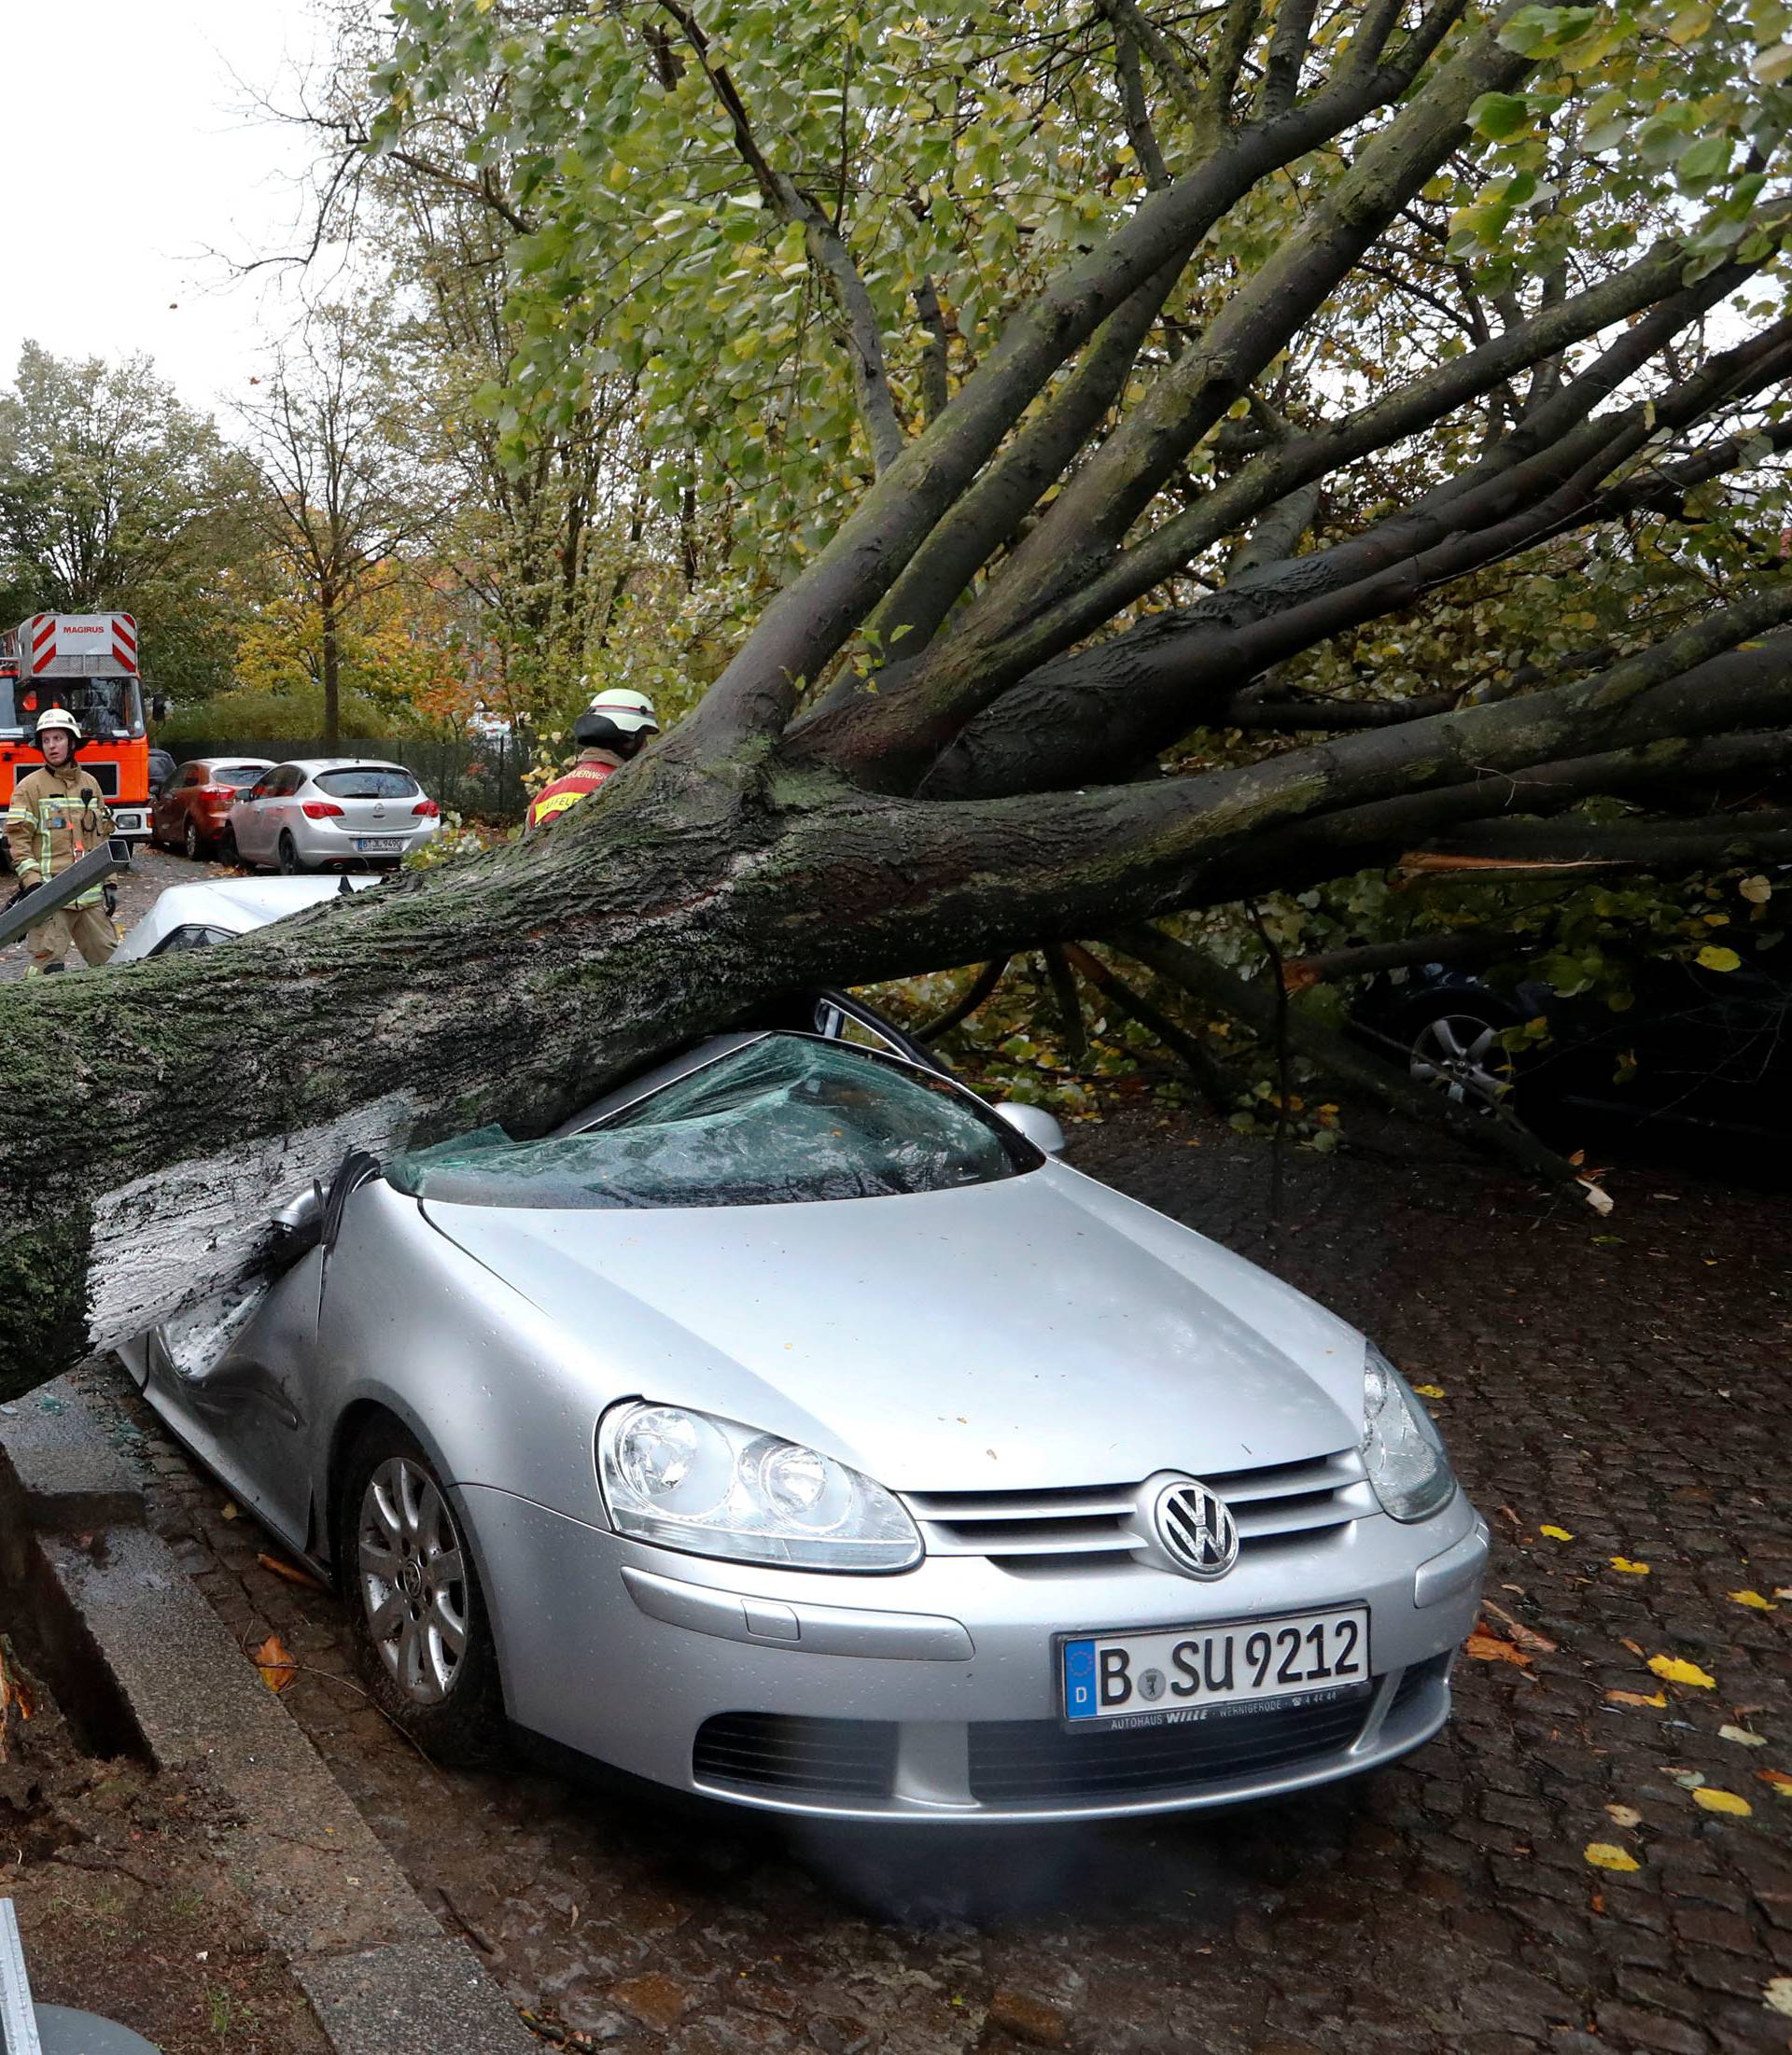 Firefighters are pictured next to a car damaged by a tree during stormy weather caused by a storm called "Herwart" in Berlin